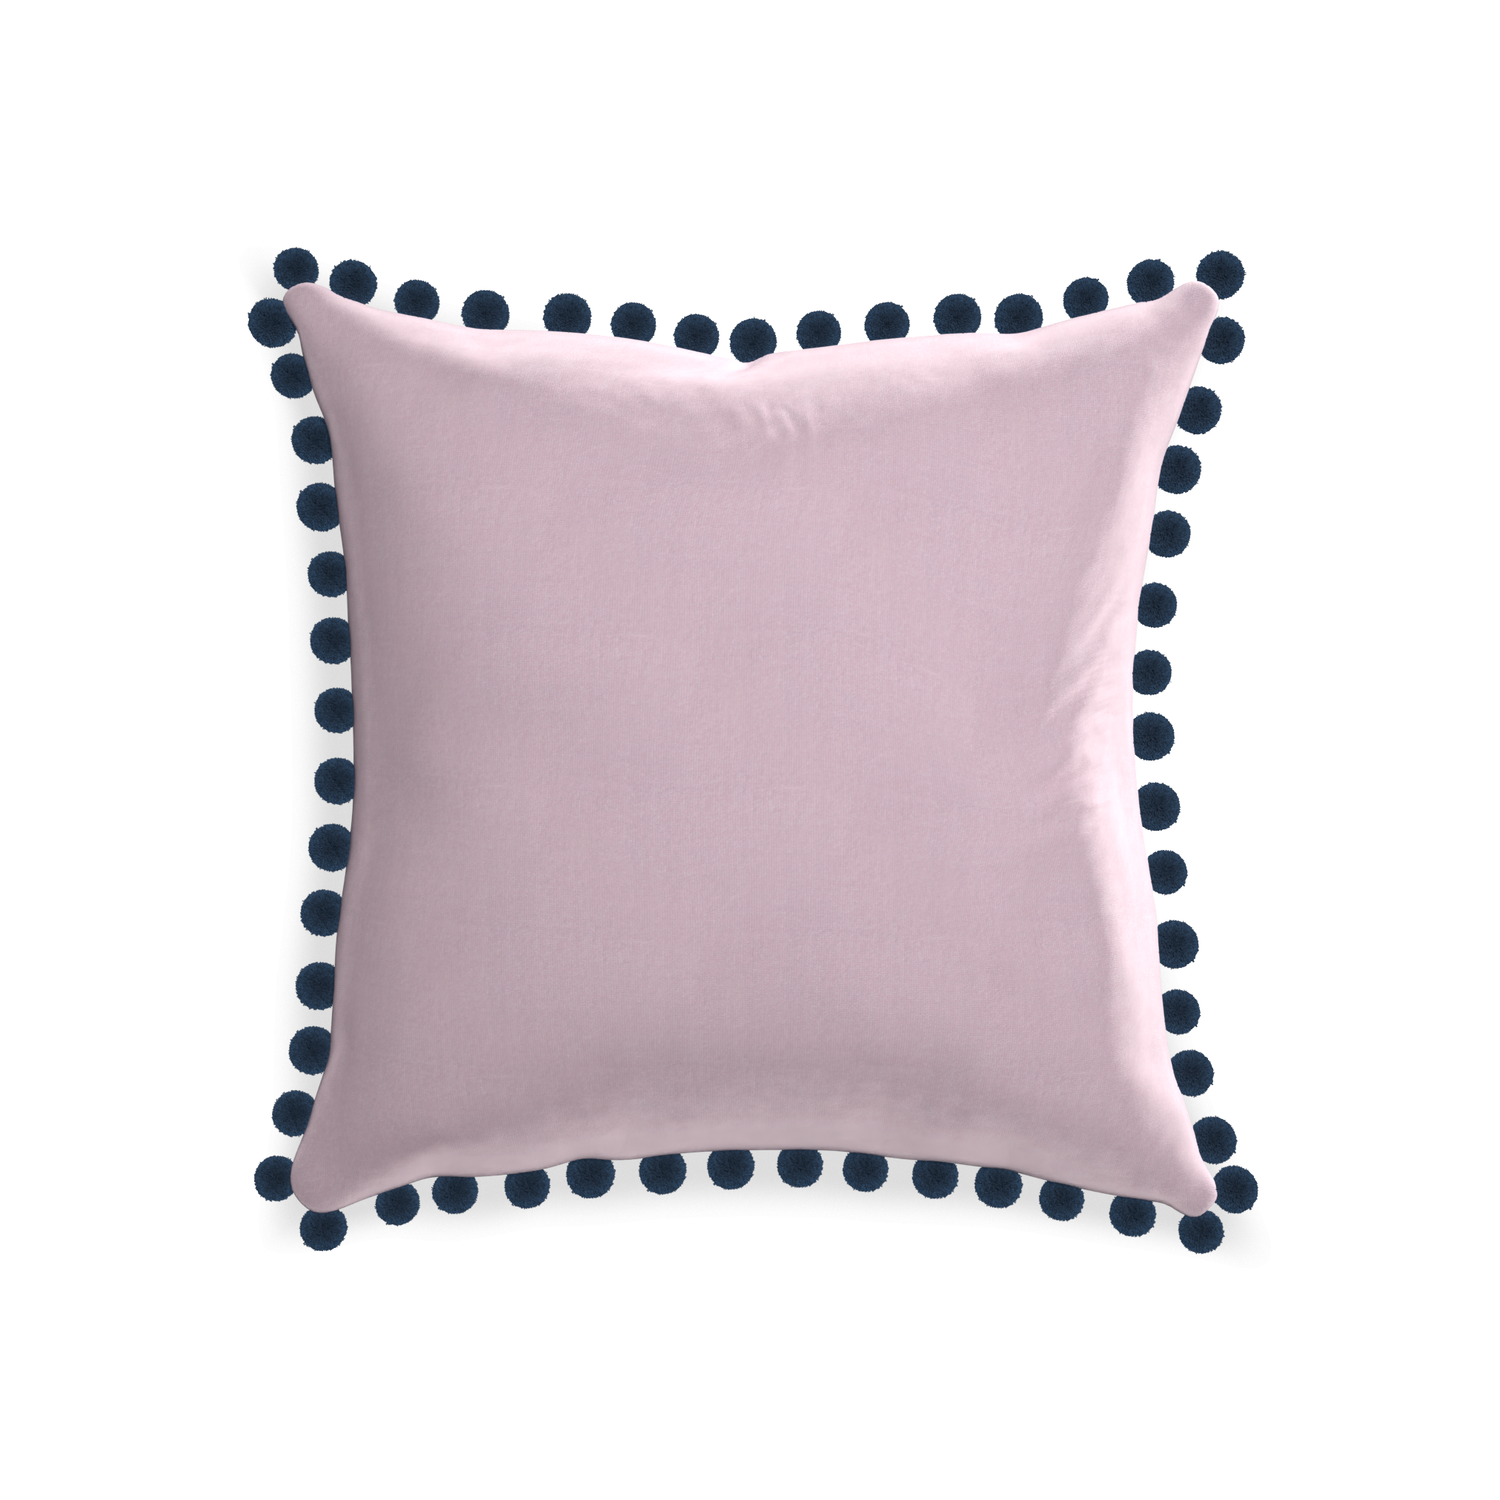 20-square lilac velvet custom lilacpillow with c on white background